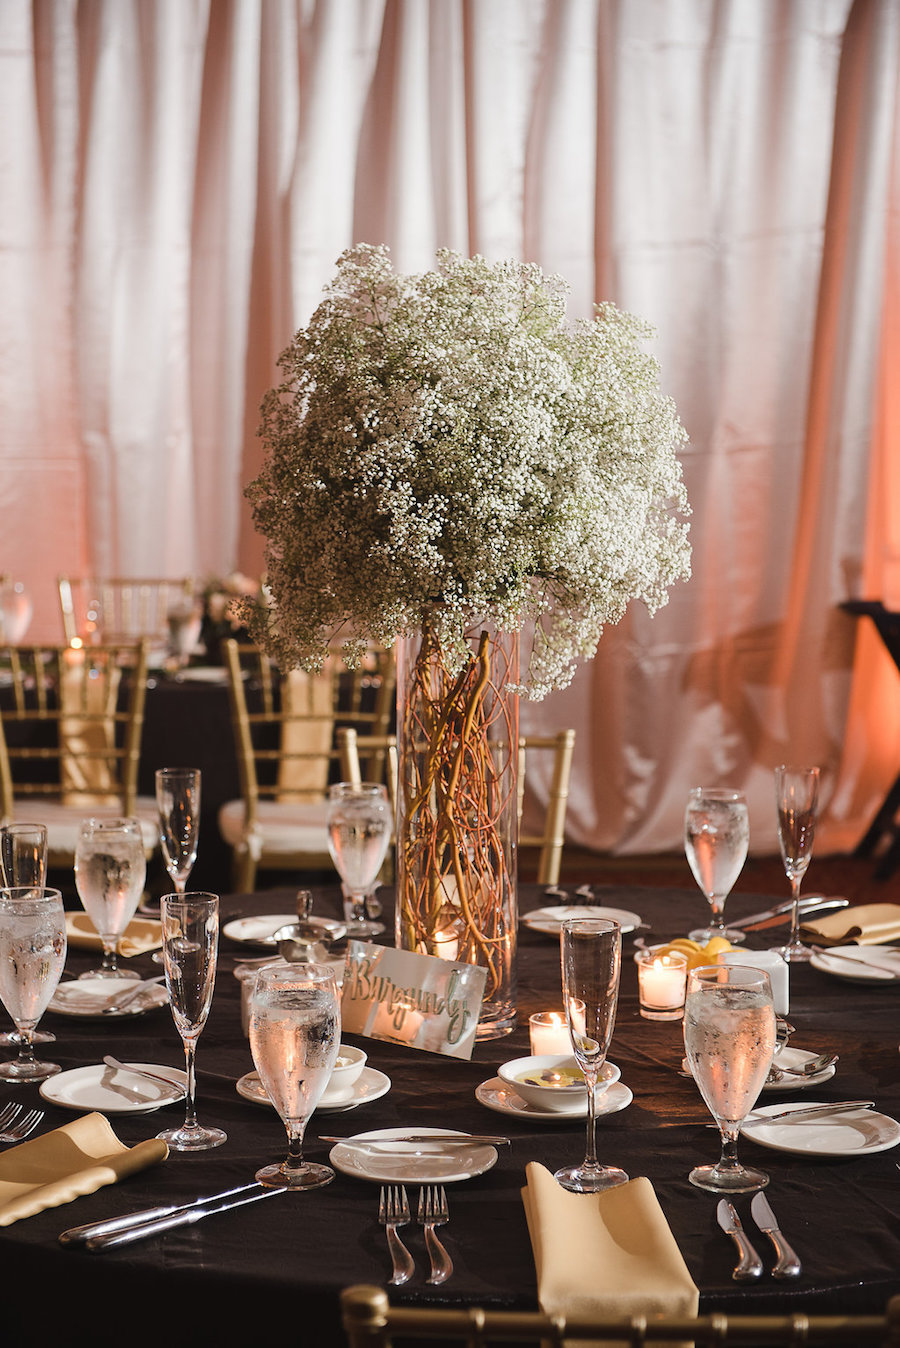 Unique Wedding Centerpiece with Baby's Breath and Vine Branches| Tampa Wedding Planner Kimberly Hensley Events | Picture by Tampa Bay Wedding Photographer Marc Edwards Photographs